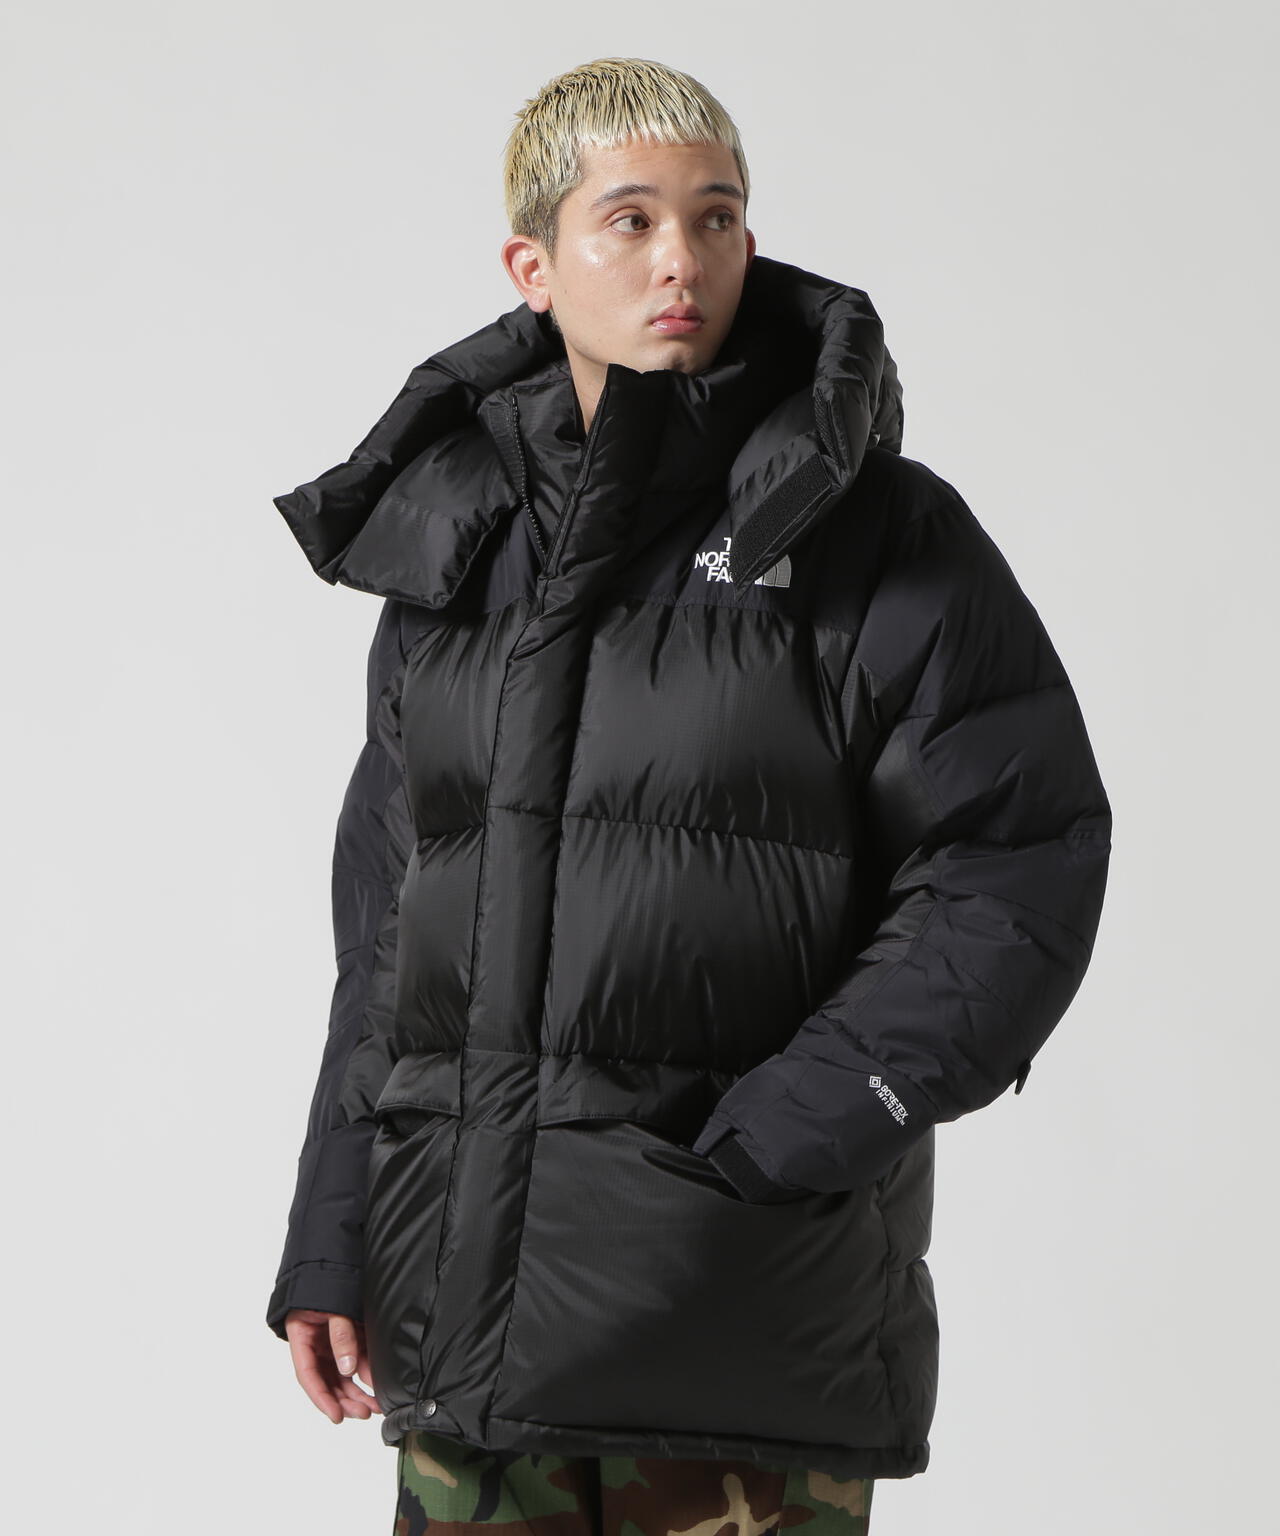 THENOUS規格　NORTHFACE HIM INSULATE JACKET/BLK